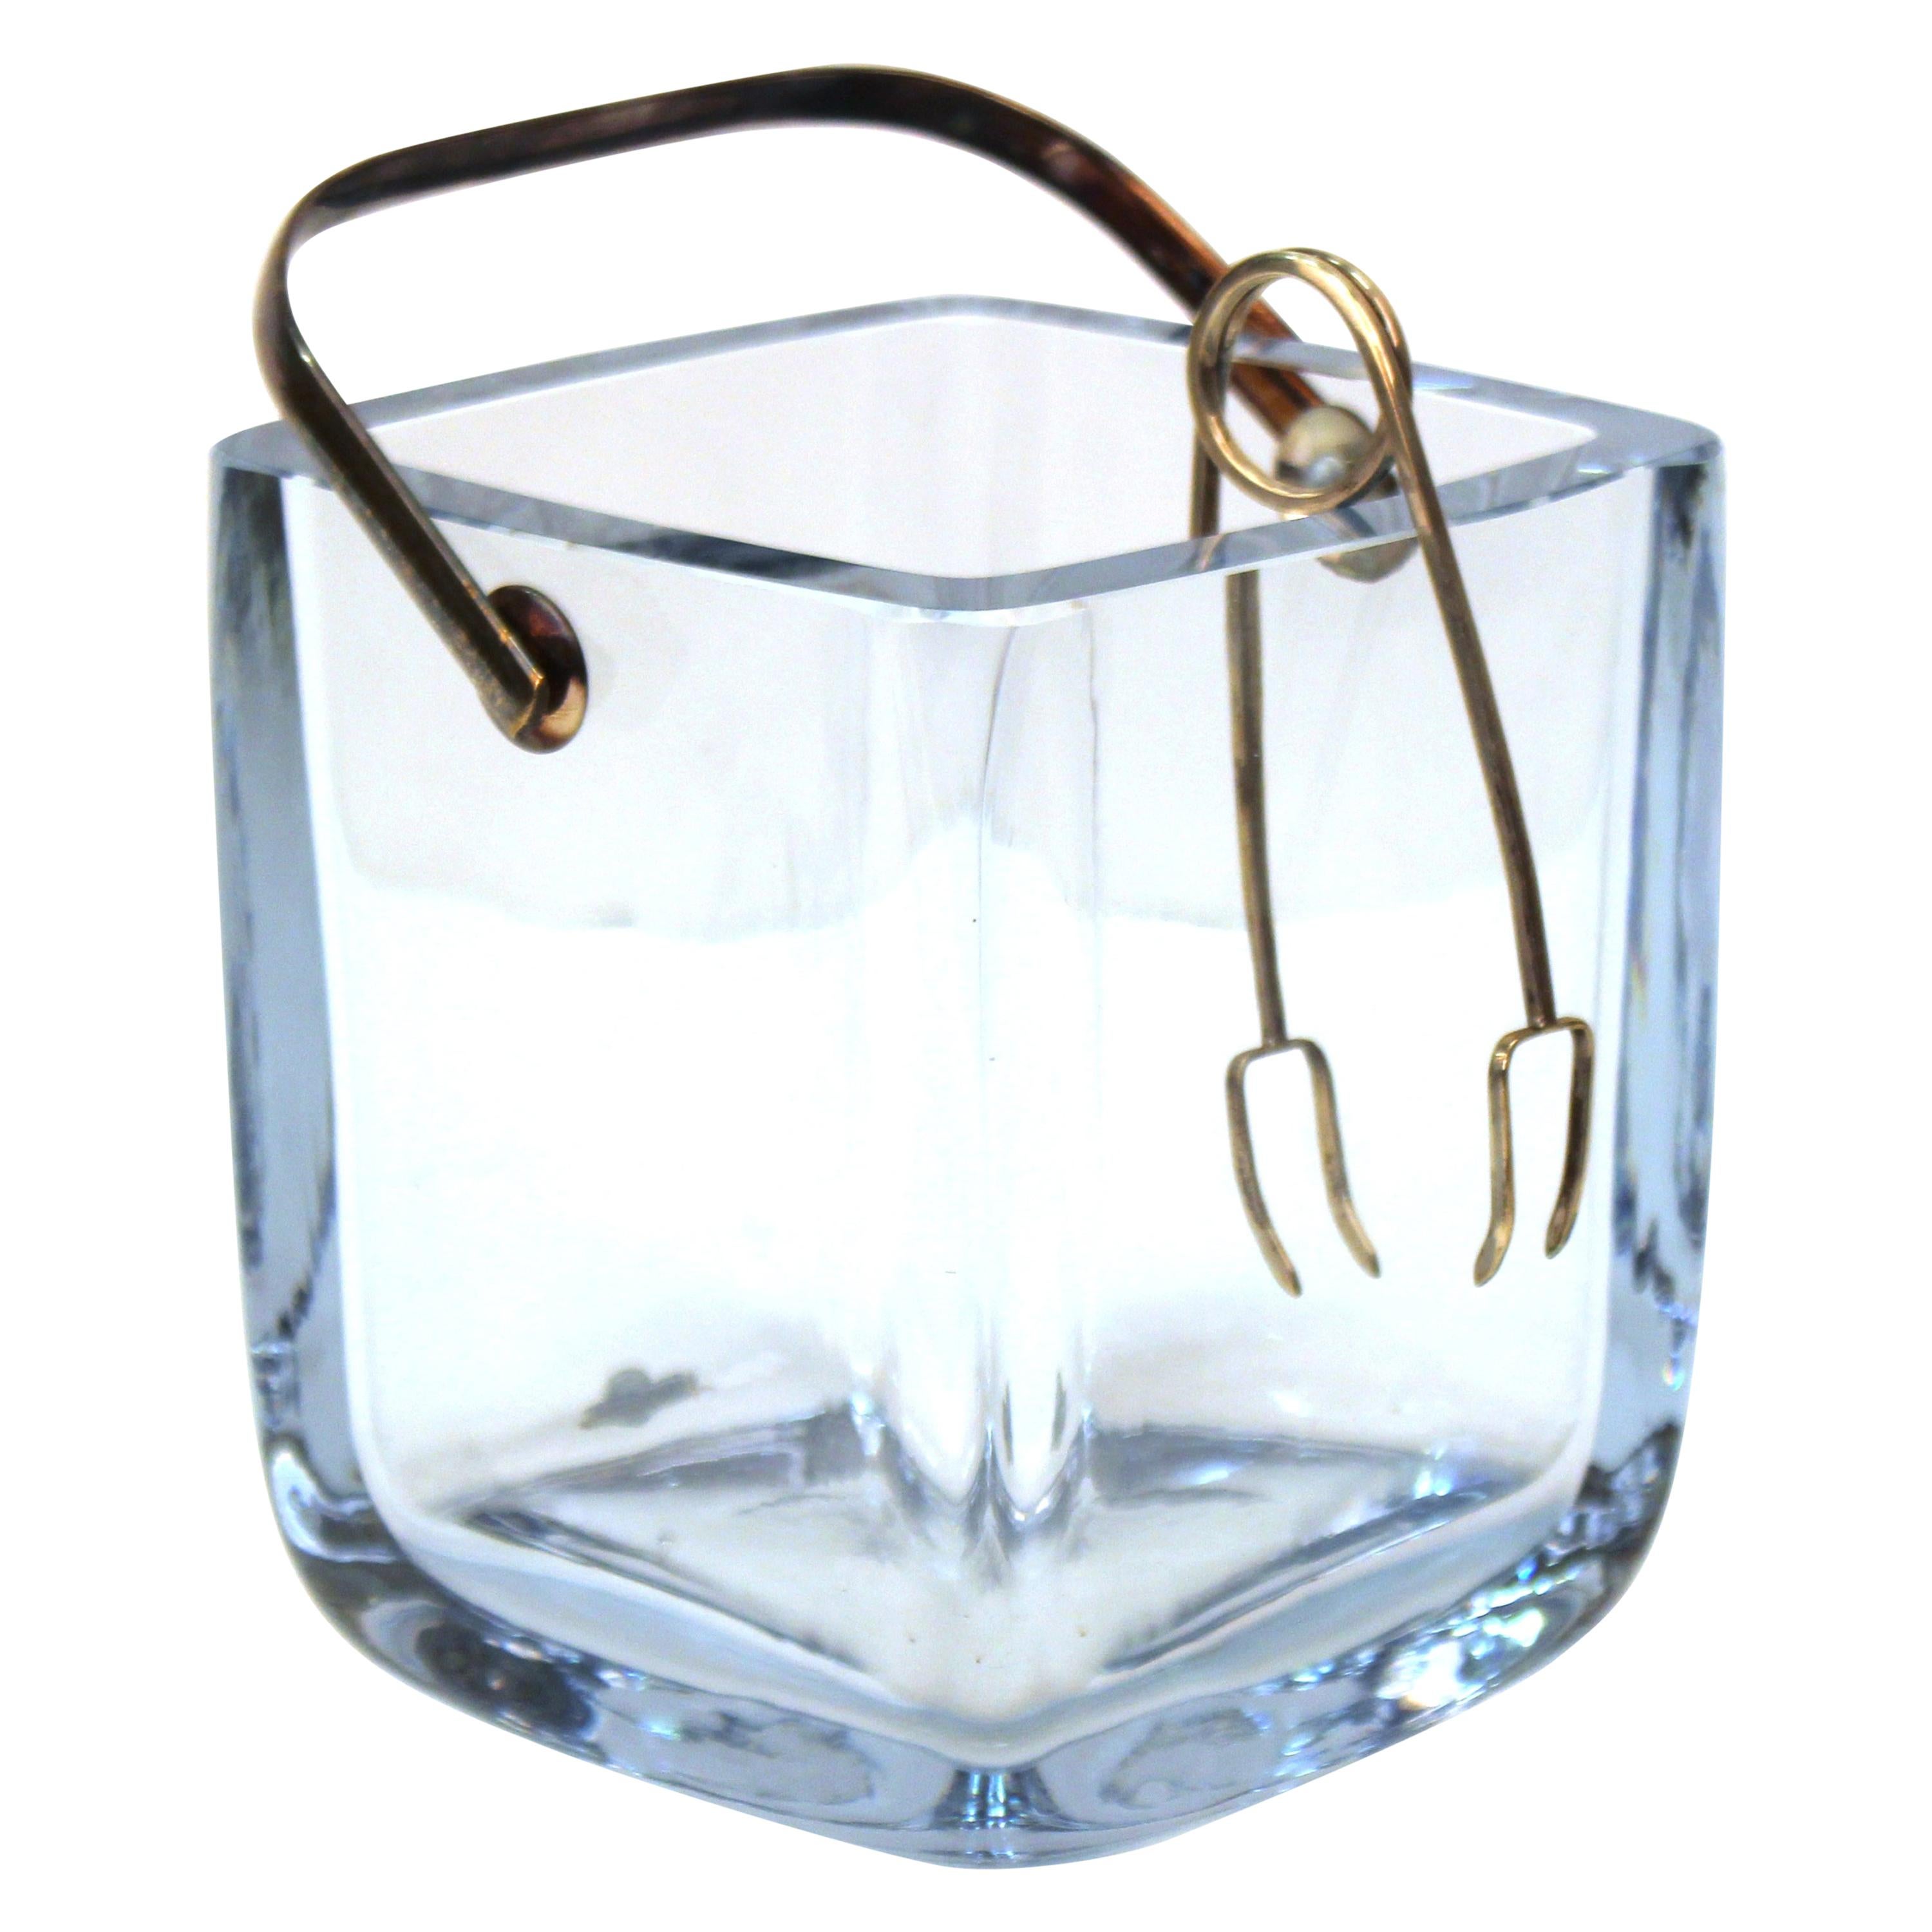 Cartier Ice Bucket in Light Blue Cut Glass and Sterling Silver Tongs